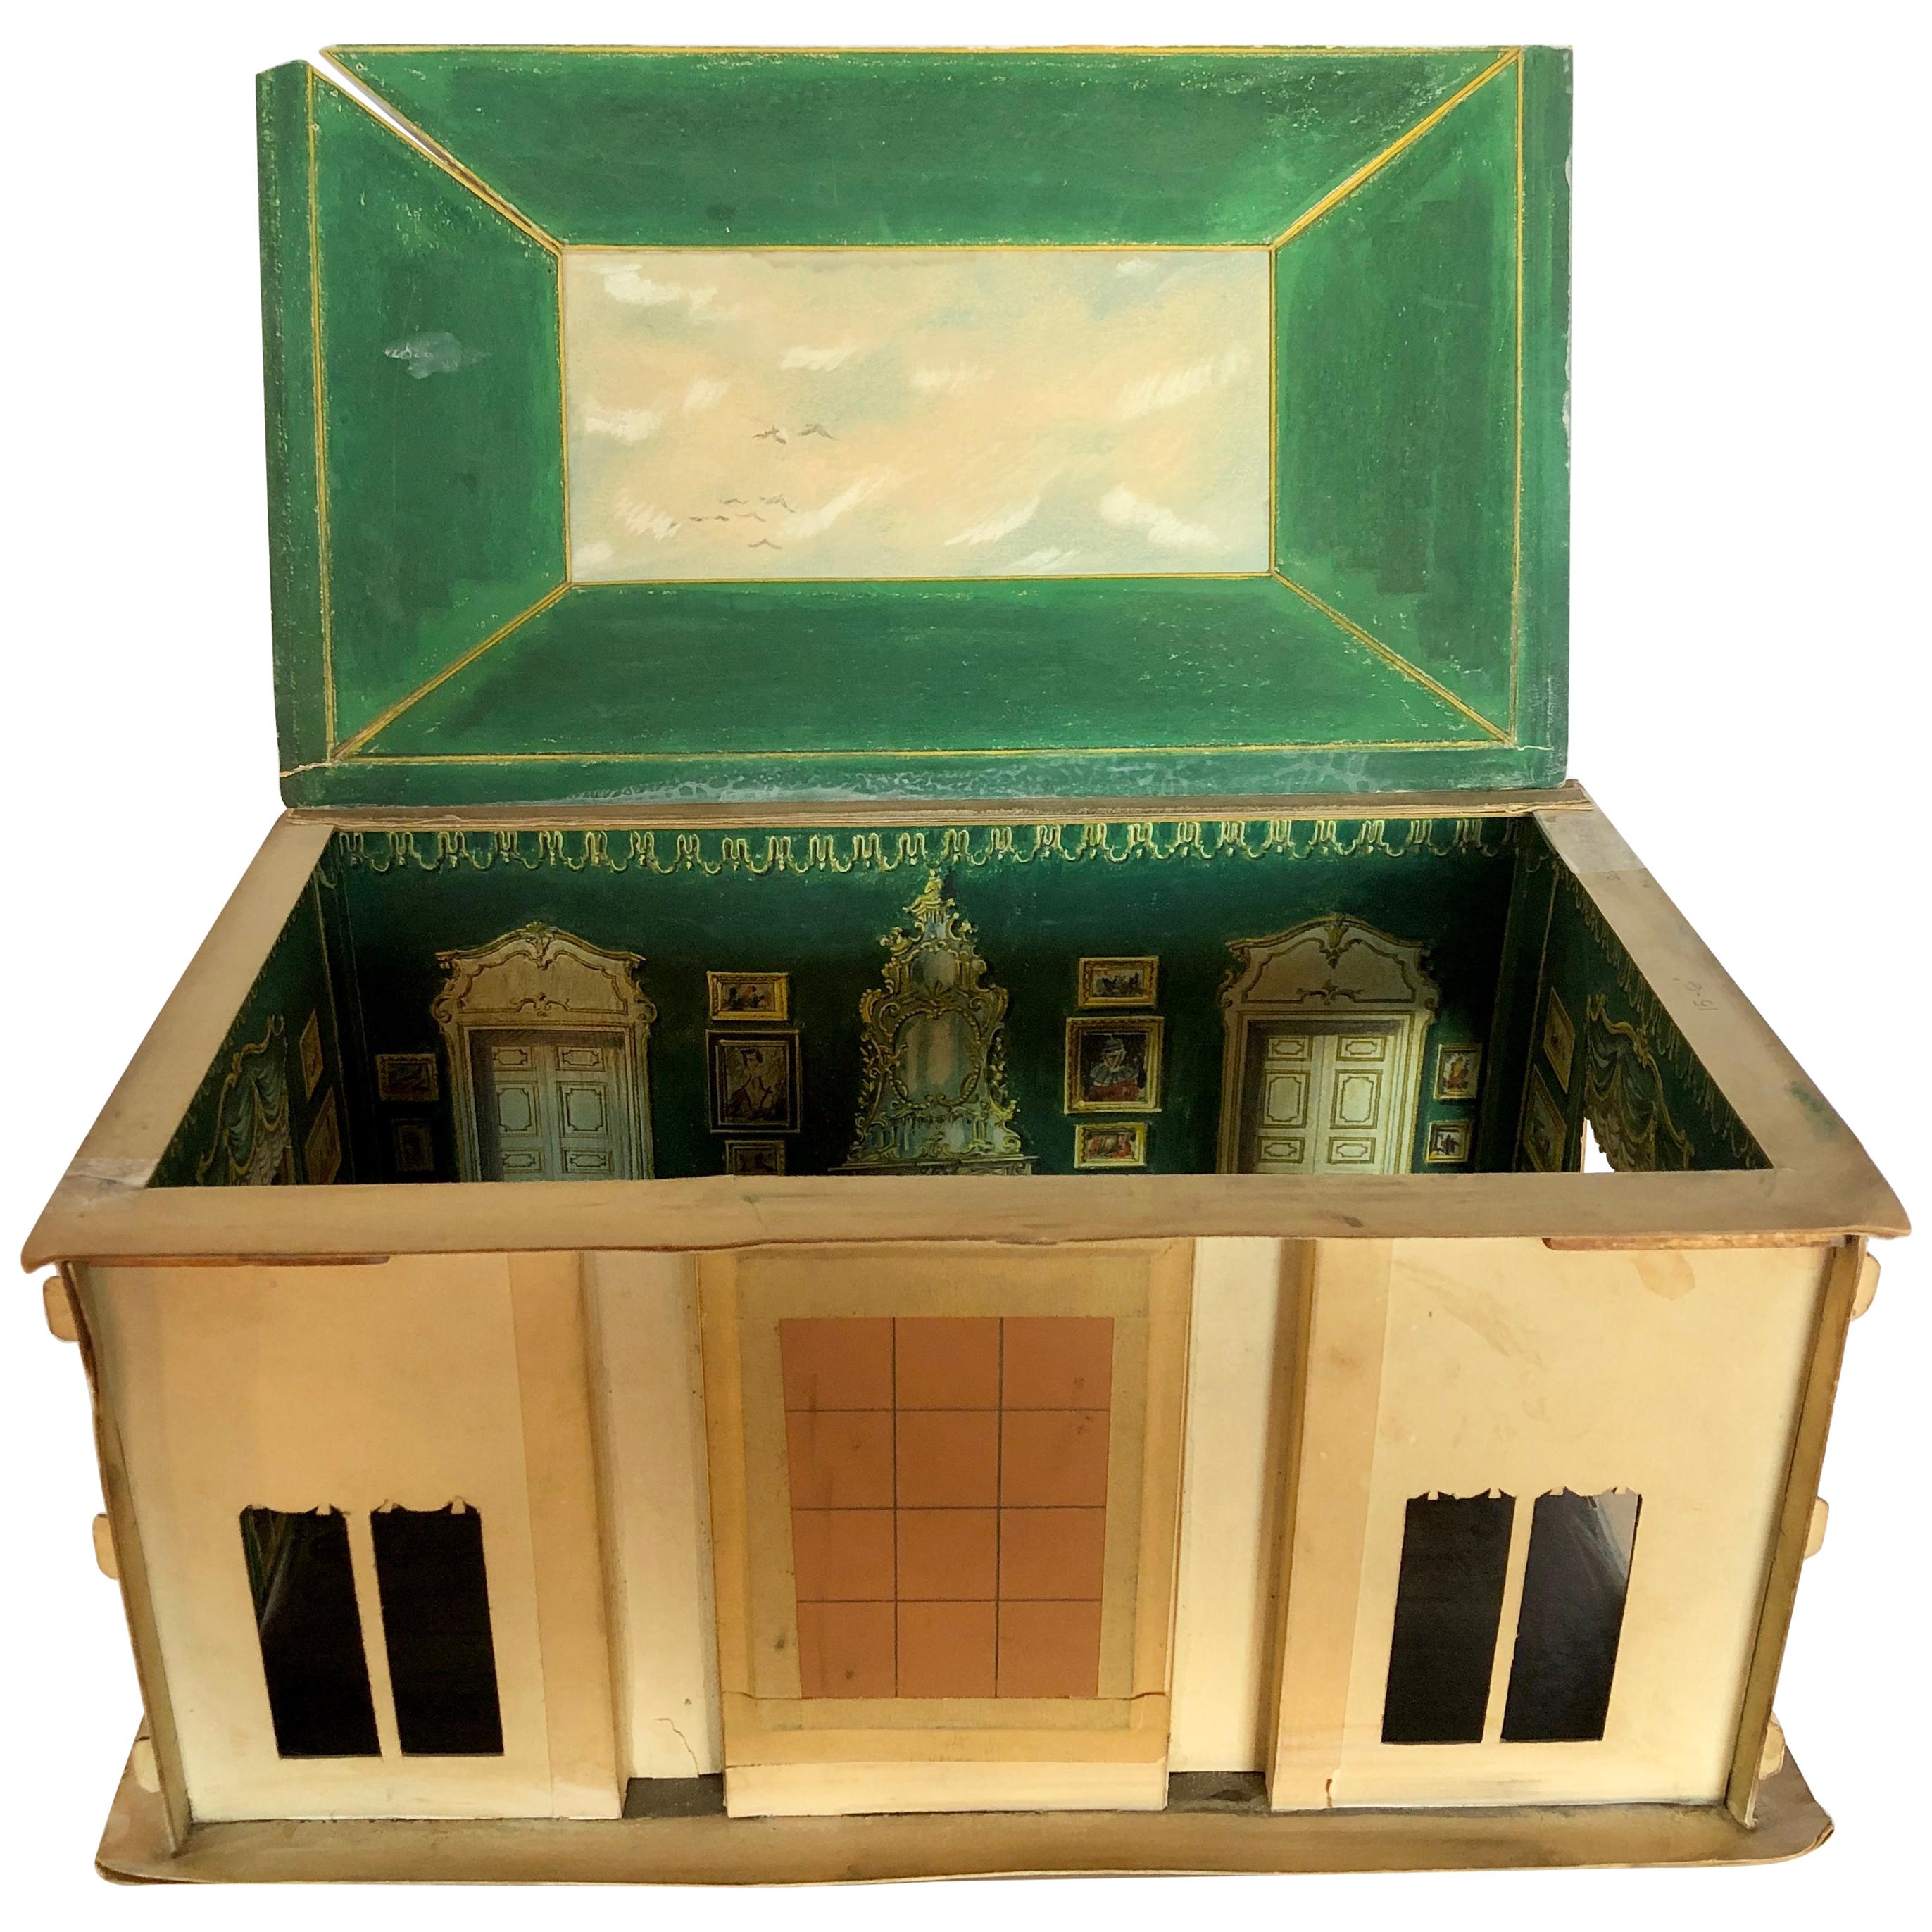 Maquette / Model of Drawing Room for Heinz Family by Maison Jansen